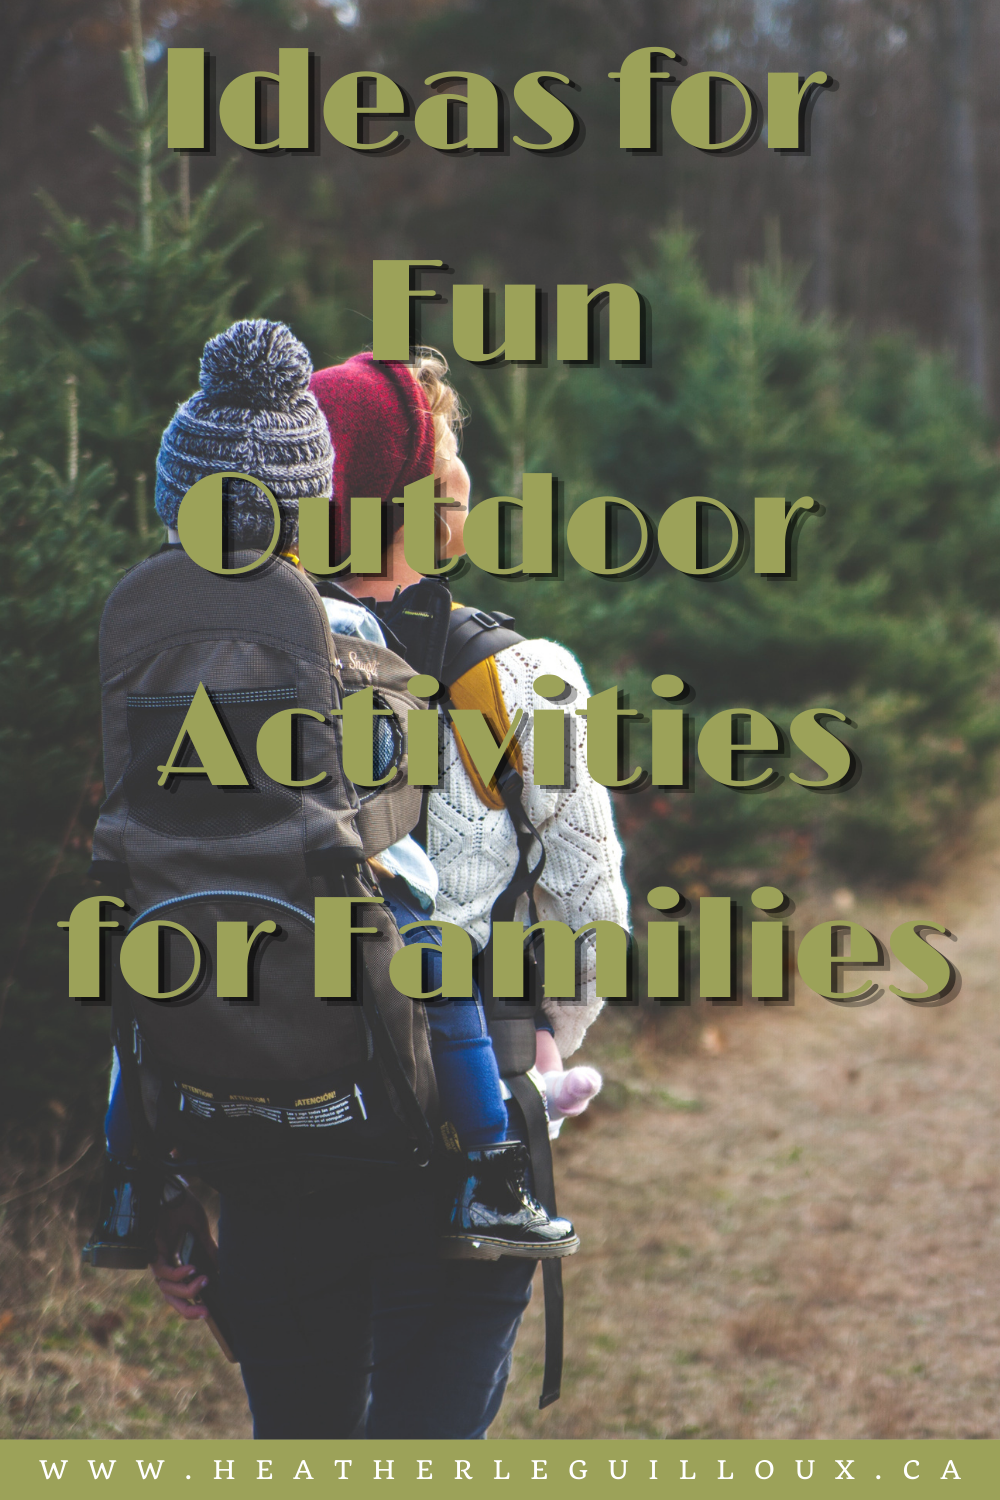 Being outside can be incredibly valuable for the wellness and mental health of individuals, so let's explore some of these fun options to get out into the great outdoors. #activities #families #outdoor